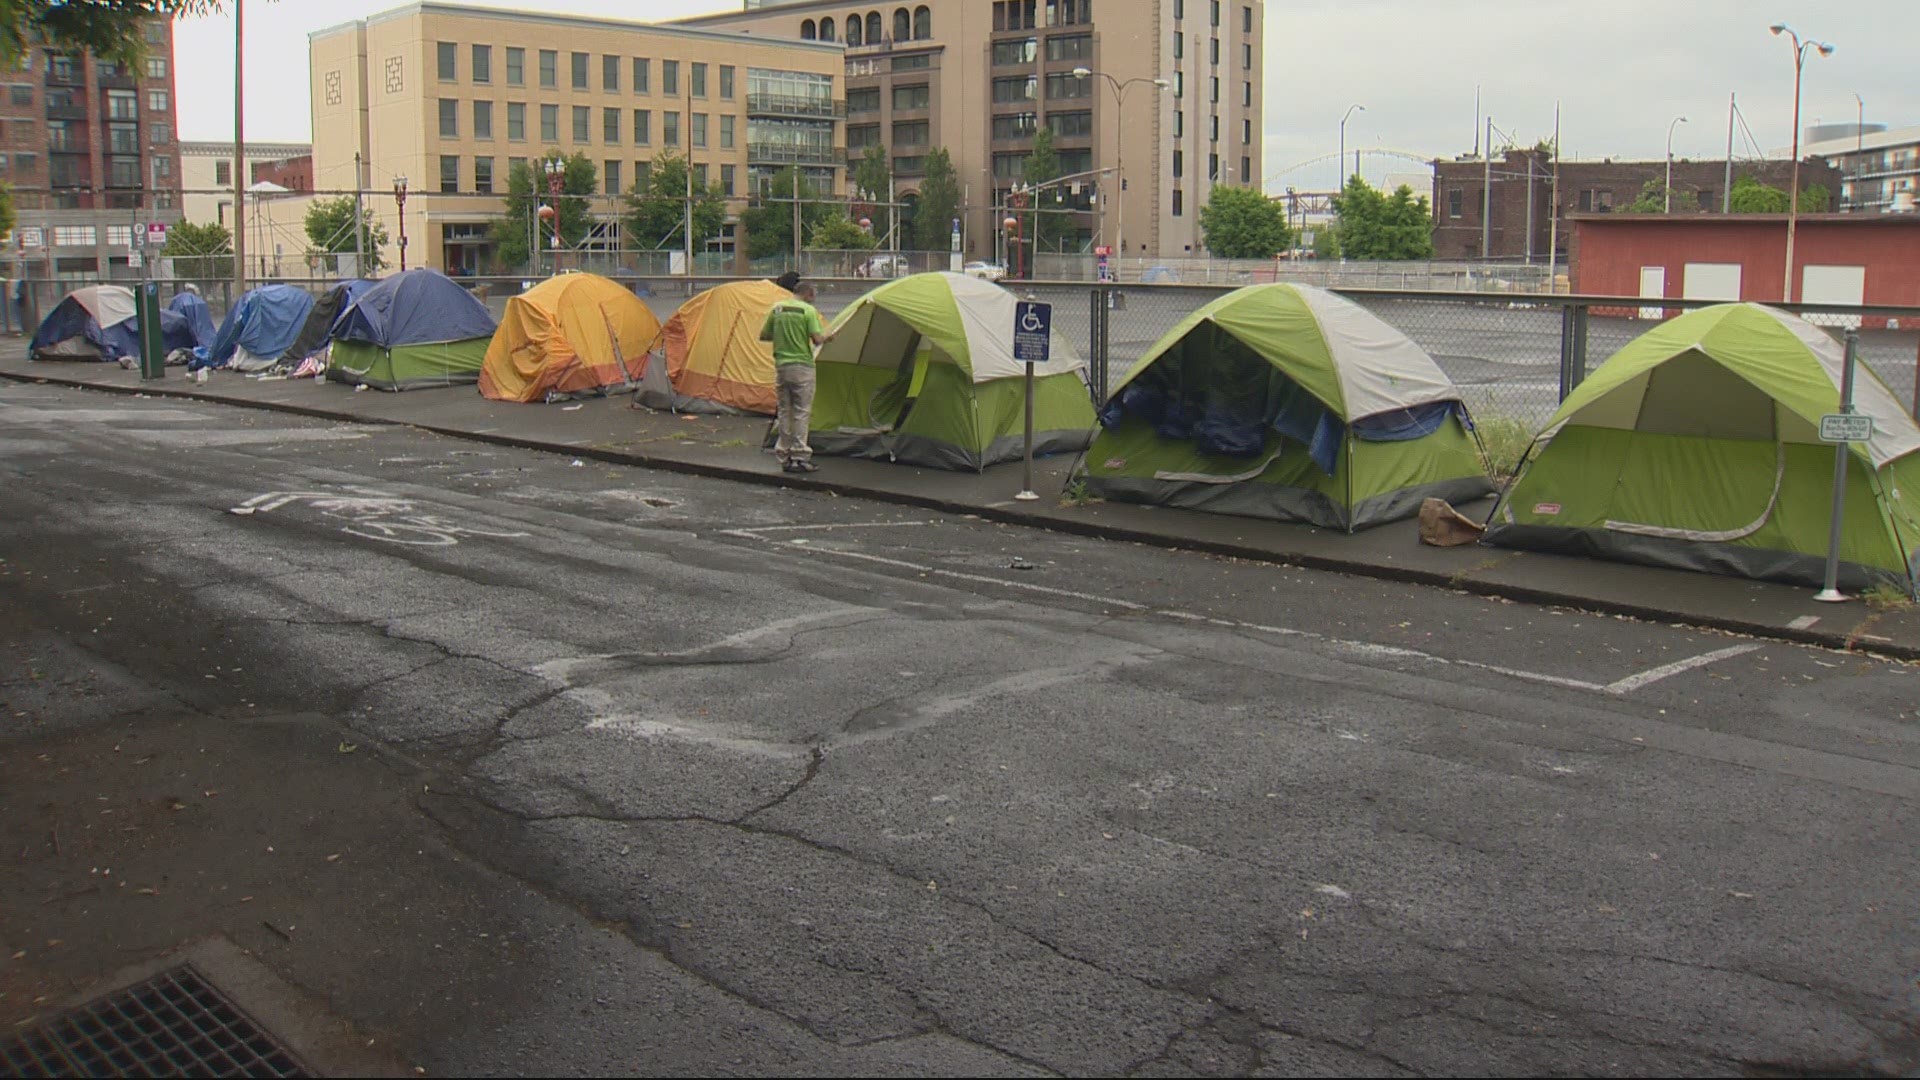 The Portland City Council voted to speed up the clearing of homeless camps. Will it make a difference?